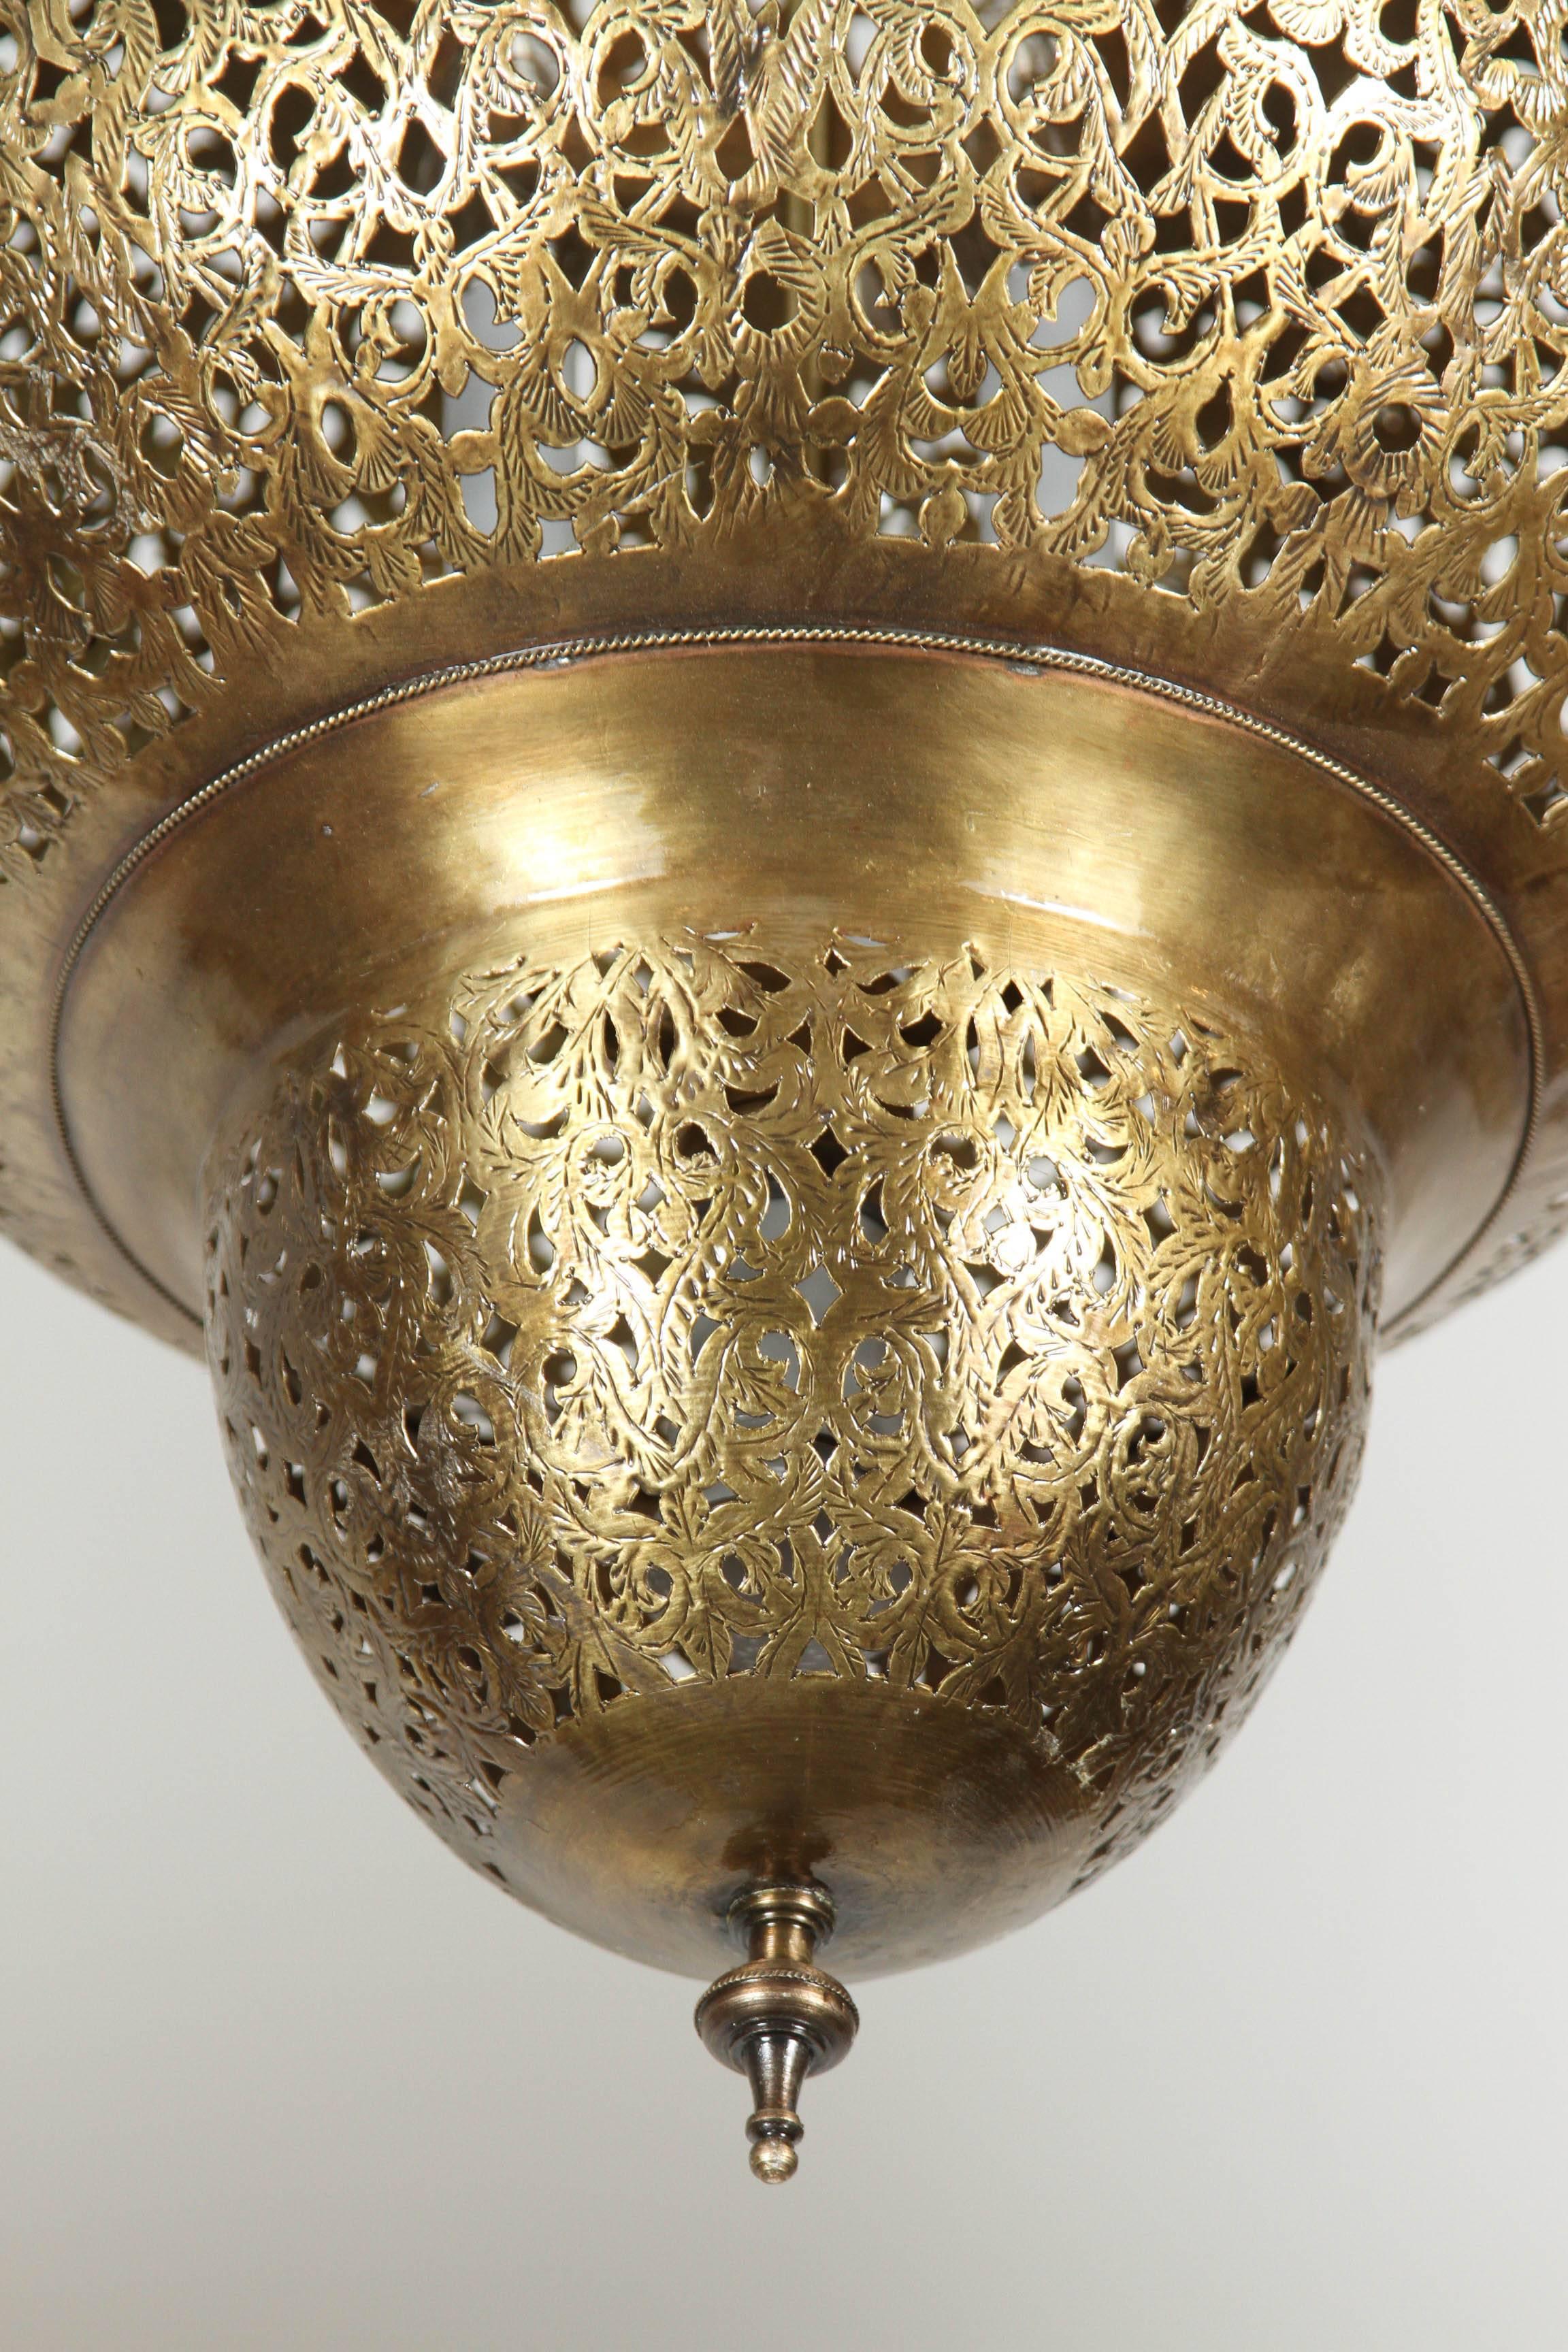 Large fabulous pierced Moroccan polished brass chandelier.
Handcrafted vintage Moroccan pierced filigree polished brass light fixture with a nice gold patina finish. The filigree designs in these pendant cast a pattern on the walls and ceiling when